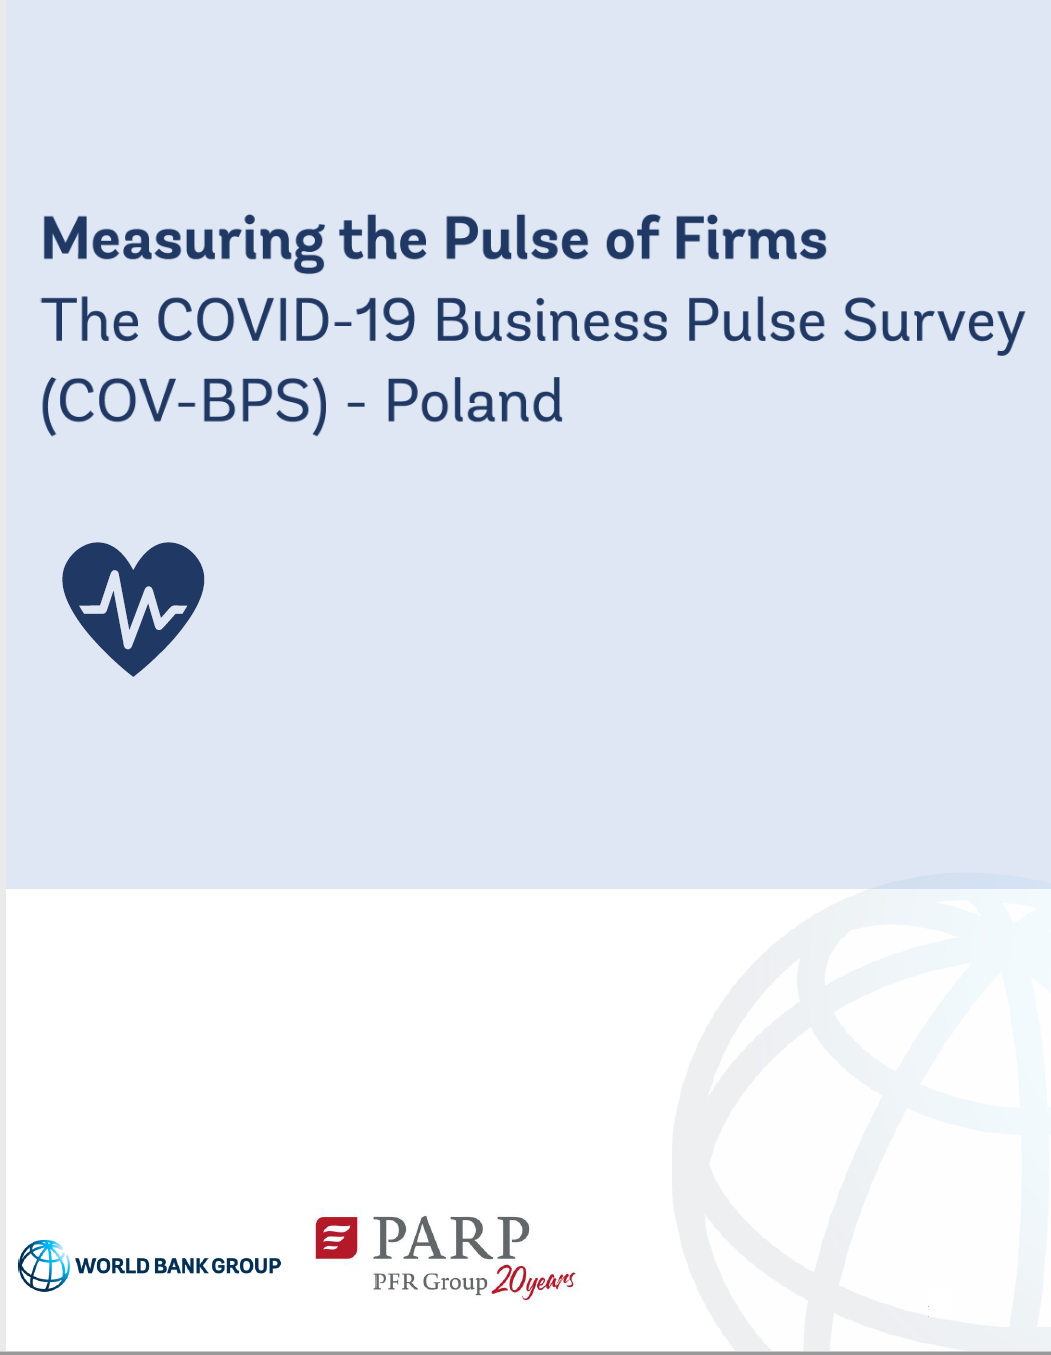 Measuring the Pulse of Firms the COVID-19 Business Pulse Survey (COV-BPS) - Poland